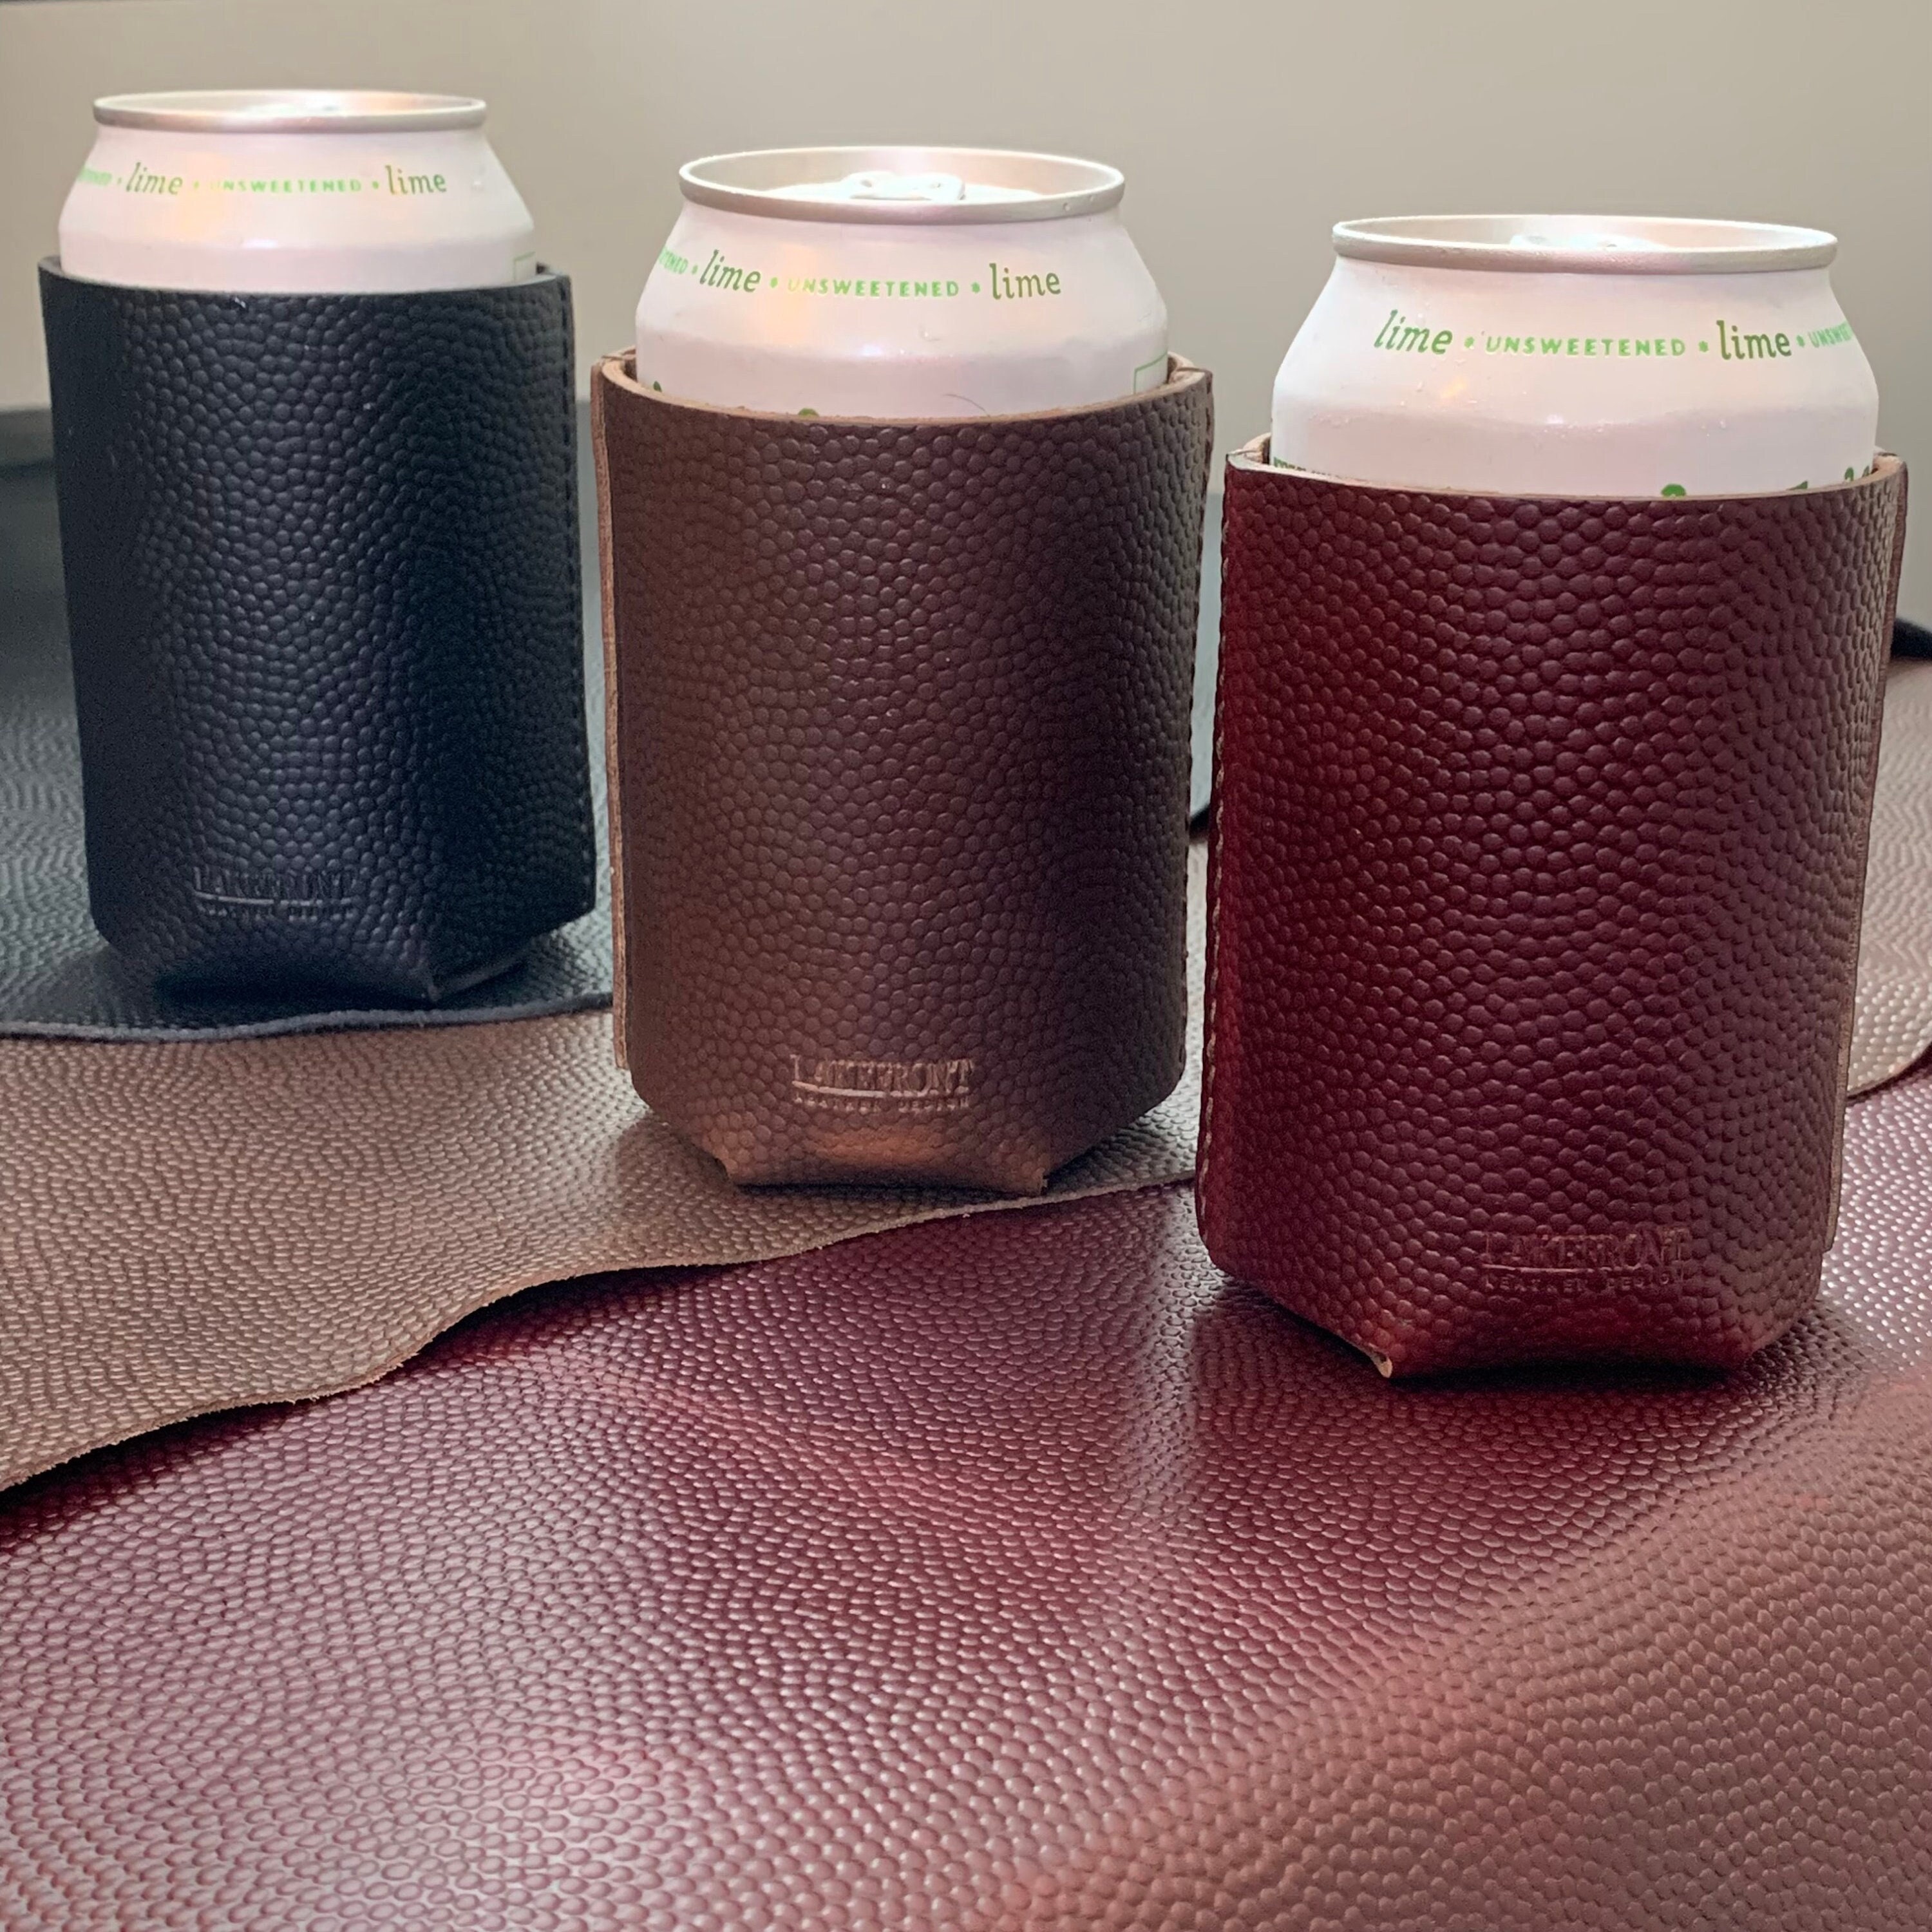  Simple Modern Standard Can Cooler, Insulated Stainless Steel  Drink Sleeve Holder, Insulate Soda, Beer, Sparkling Water, Gift for Women  Men Her Him, Ranger Collection, Standard 12oz